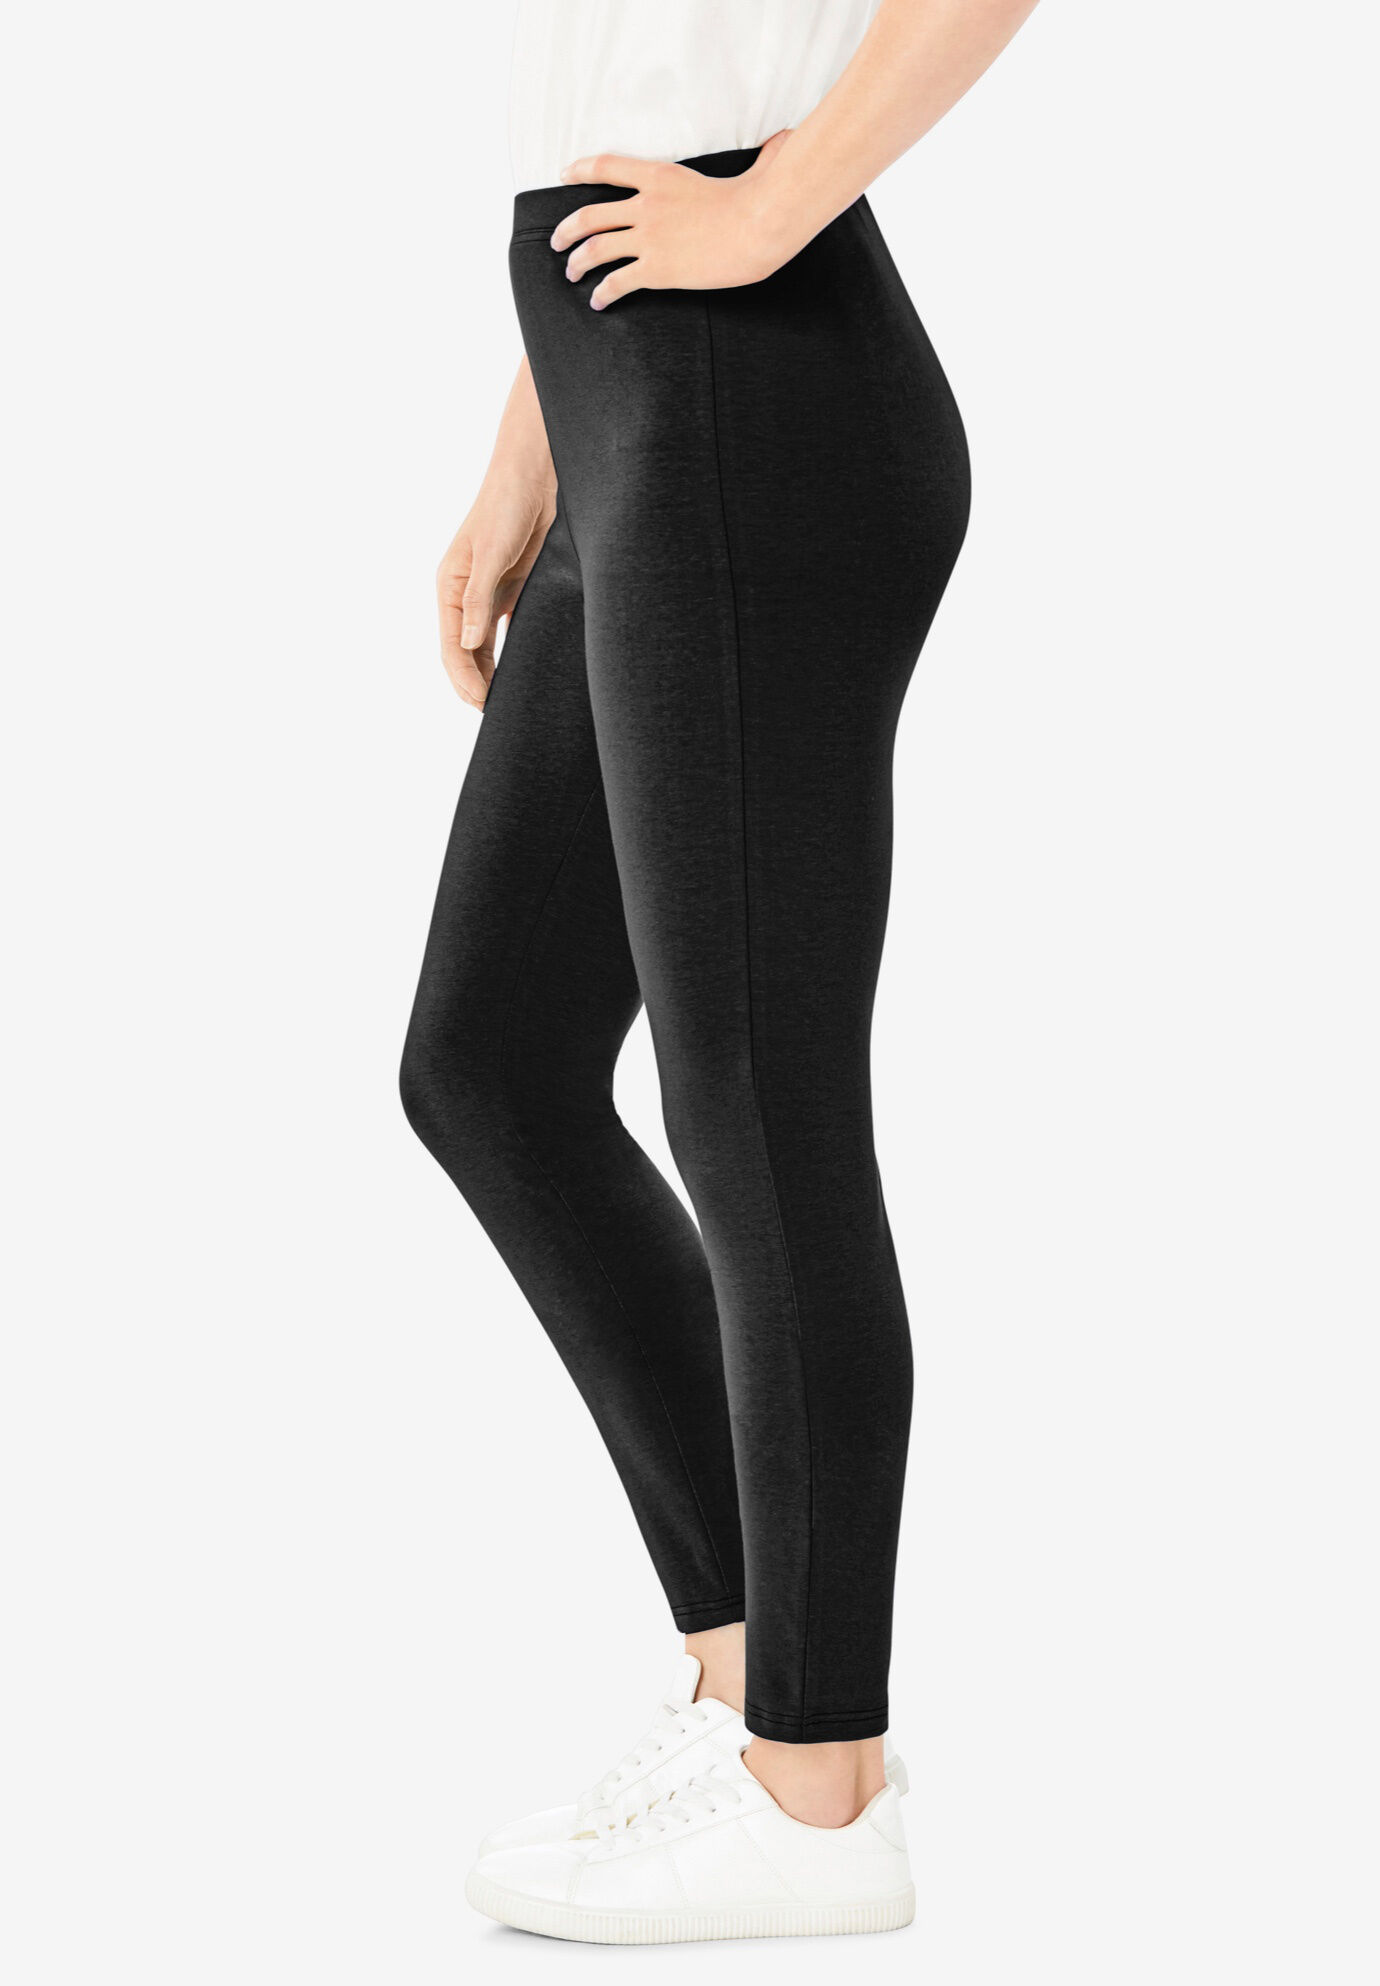 Women's Casual Ankle Length Leggings (One Size, Red) - Walgrow.com